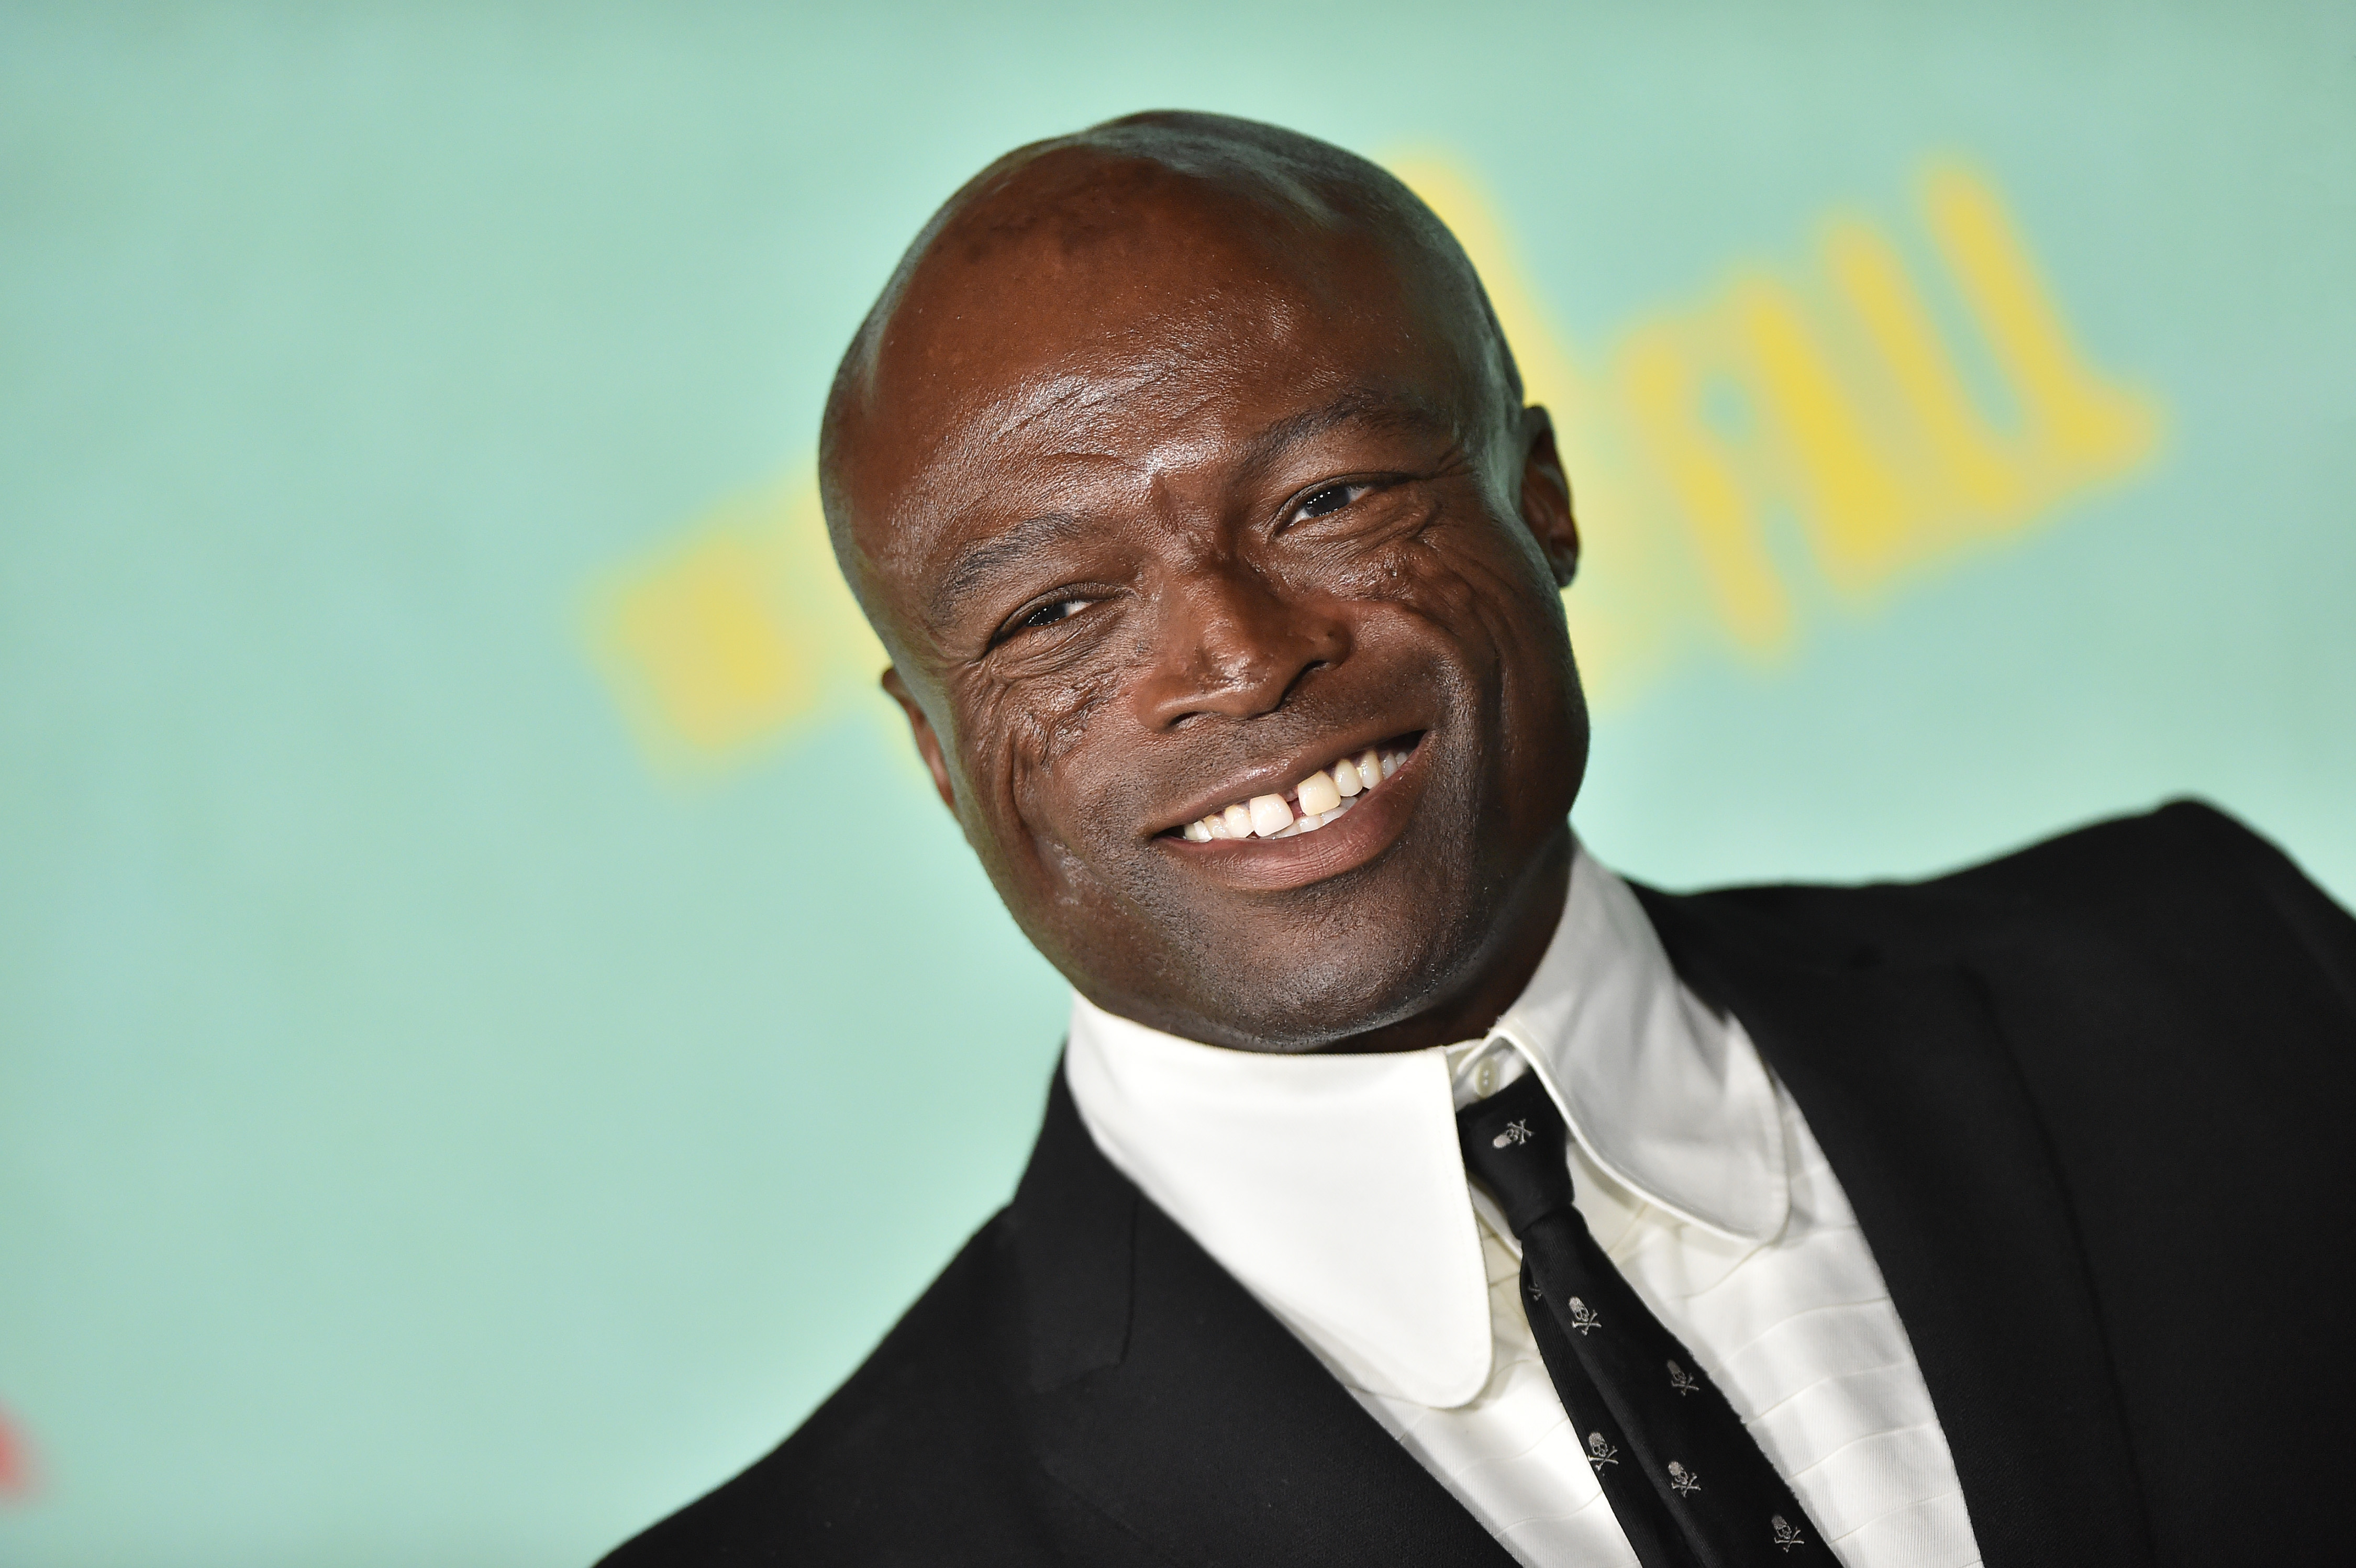 Seal at the premiere of "The Harder They Fall" on October 13, 2021, in Los Angeles, California. | Source: Getty Images